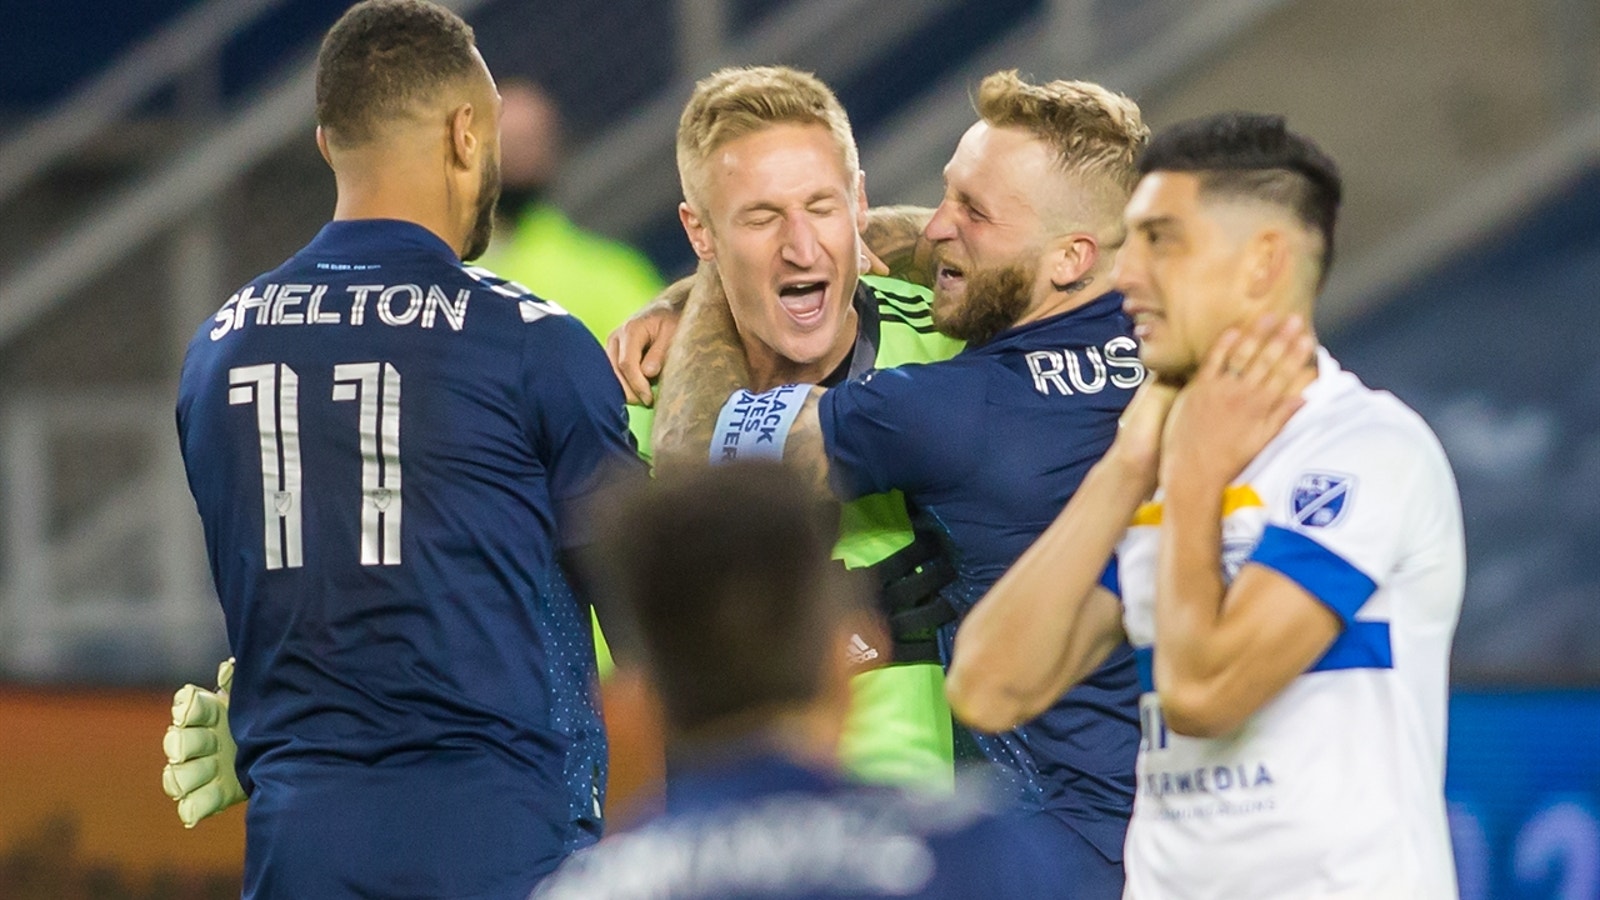 Sporting KC escapes with penalty shootout playoff win after late collapse